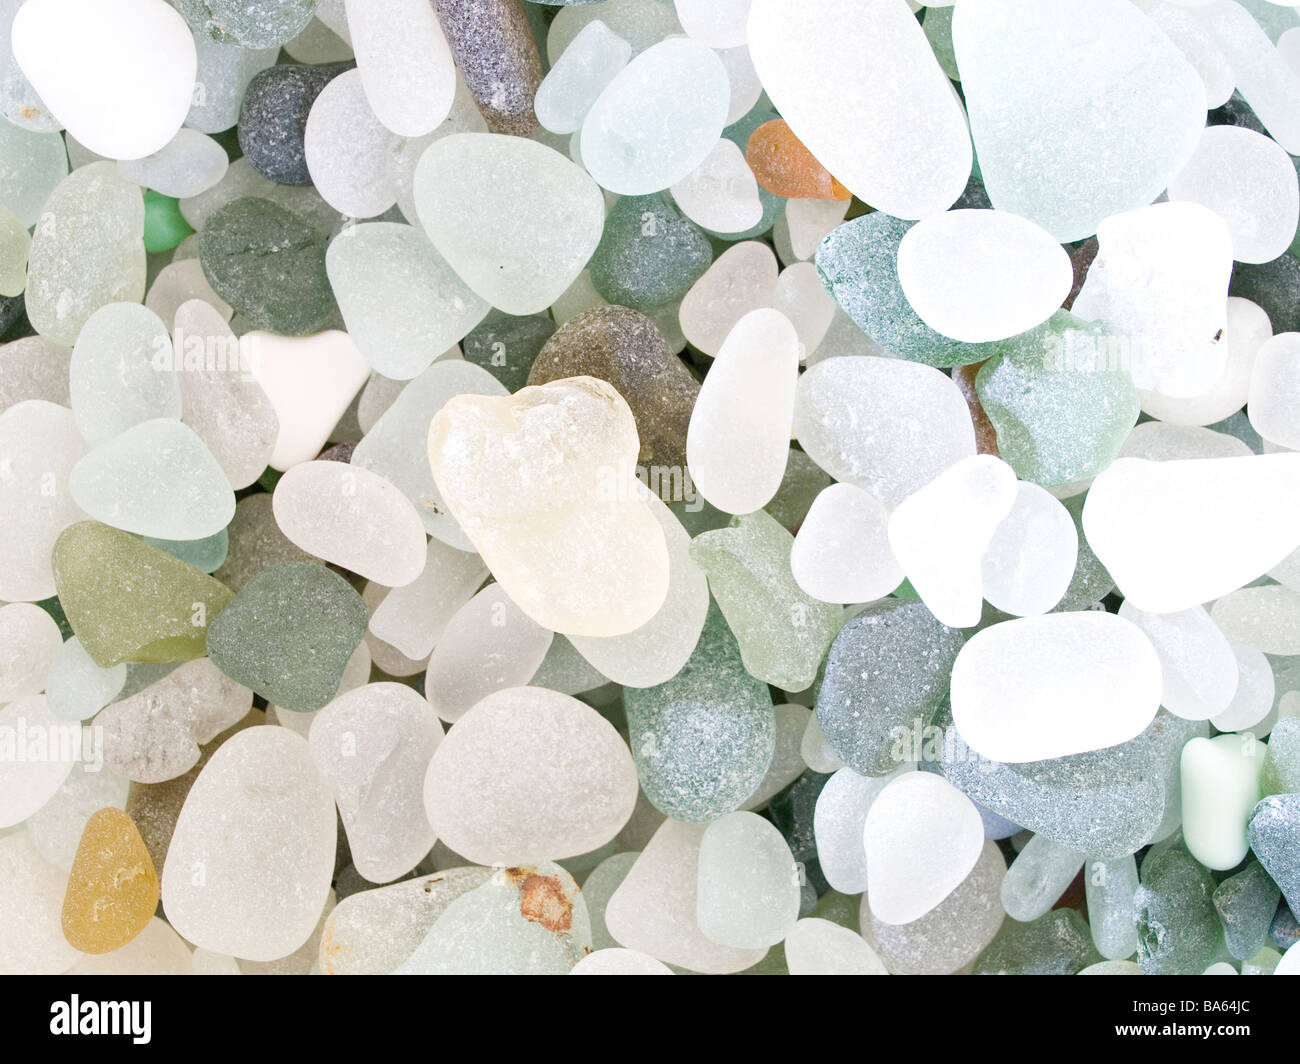 Sea worn glass pebbles collected from a beach displayed en masse also known as 'mermaids tears' and used for making jewellery. Stock Photo